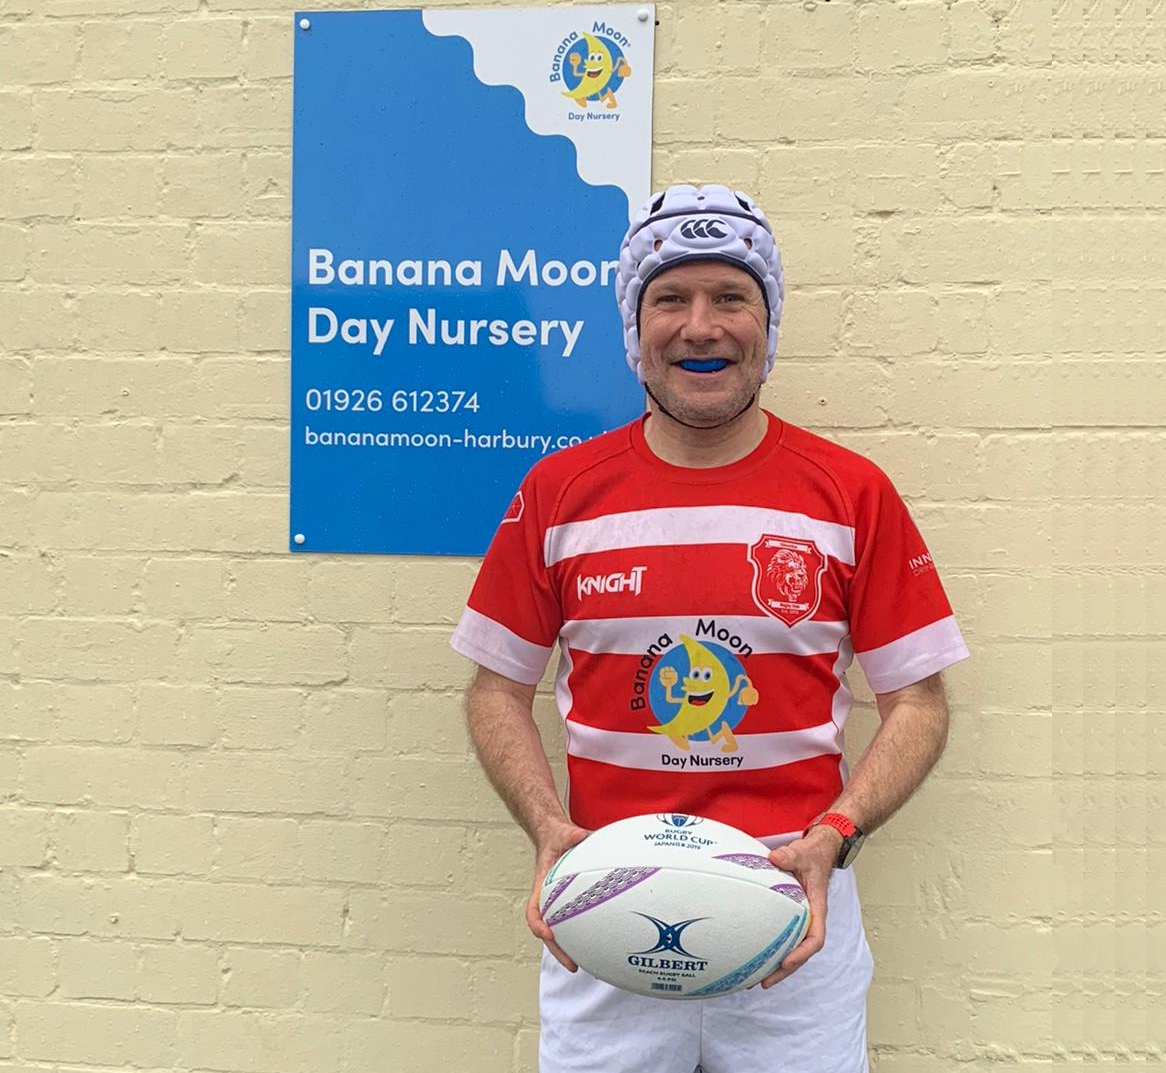 Our Director takes on world-record attempt for charity in Barney's Rugby Run